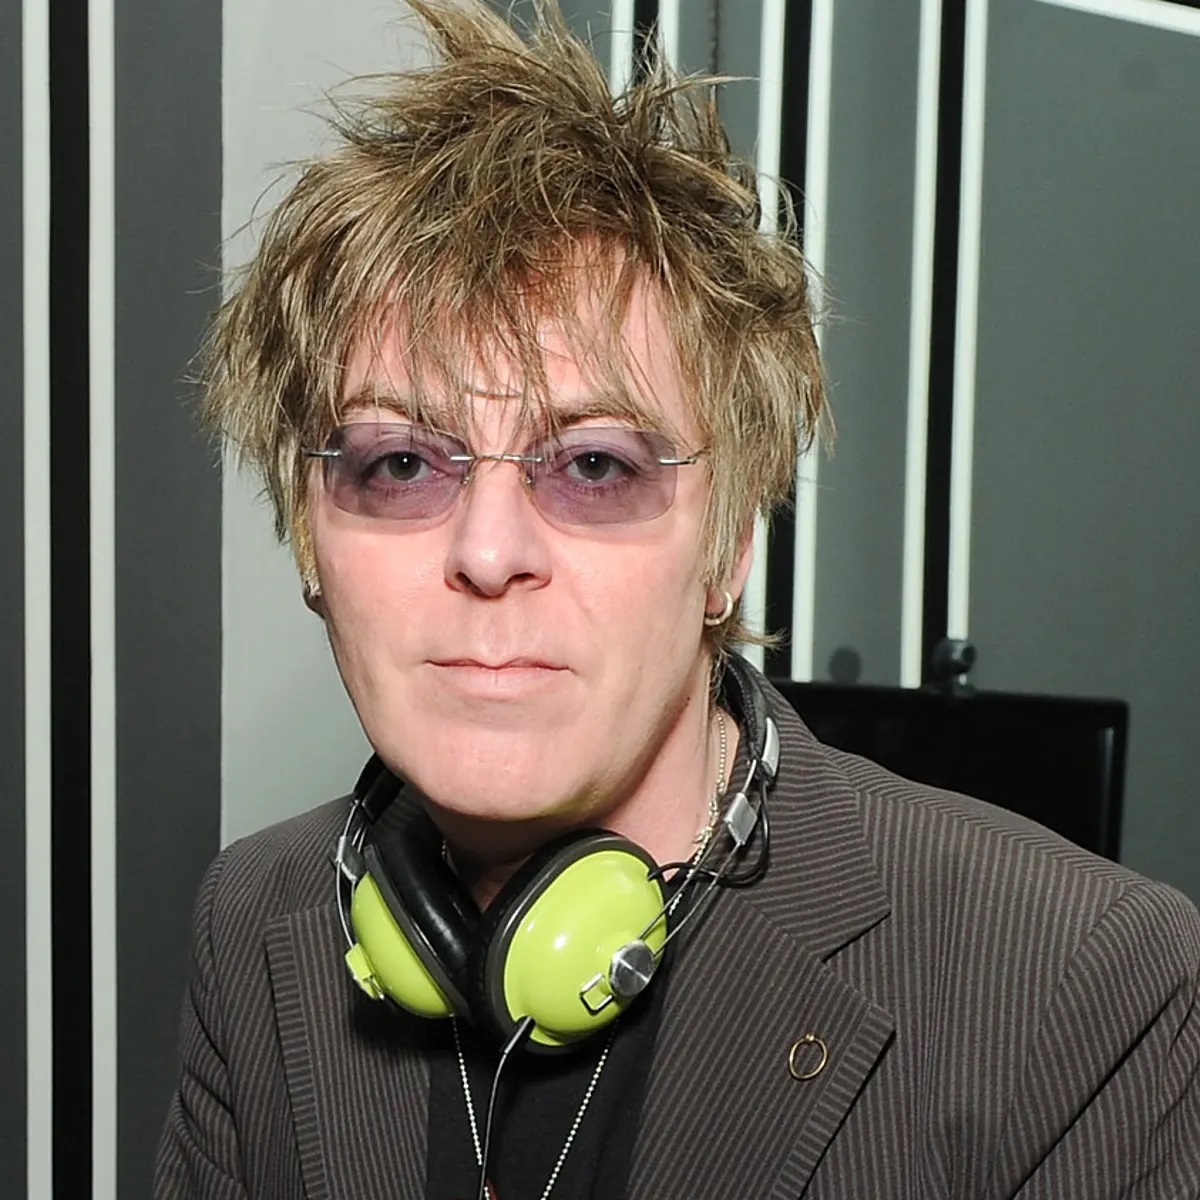 andy rourke